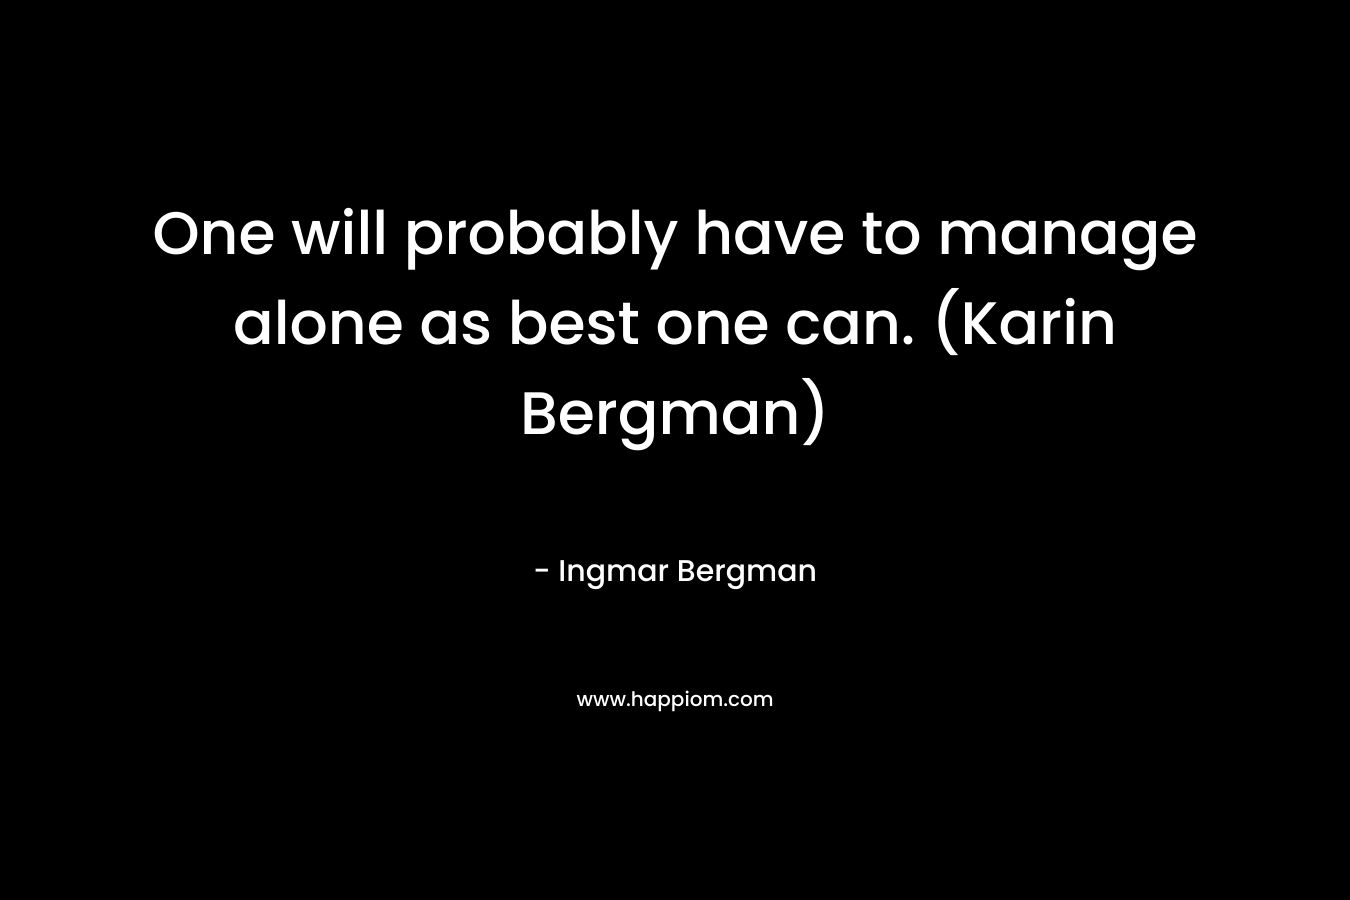 One will probably have to manage alone as best one can. (Karin Bergman)